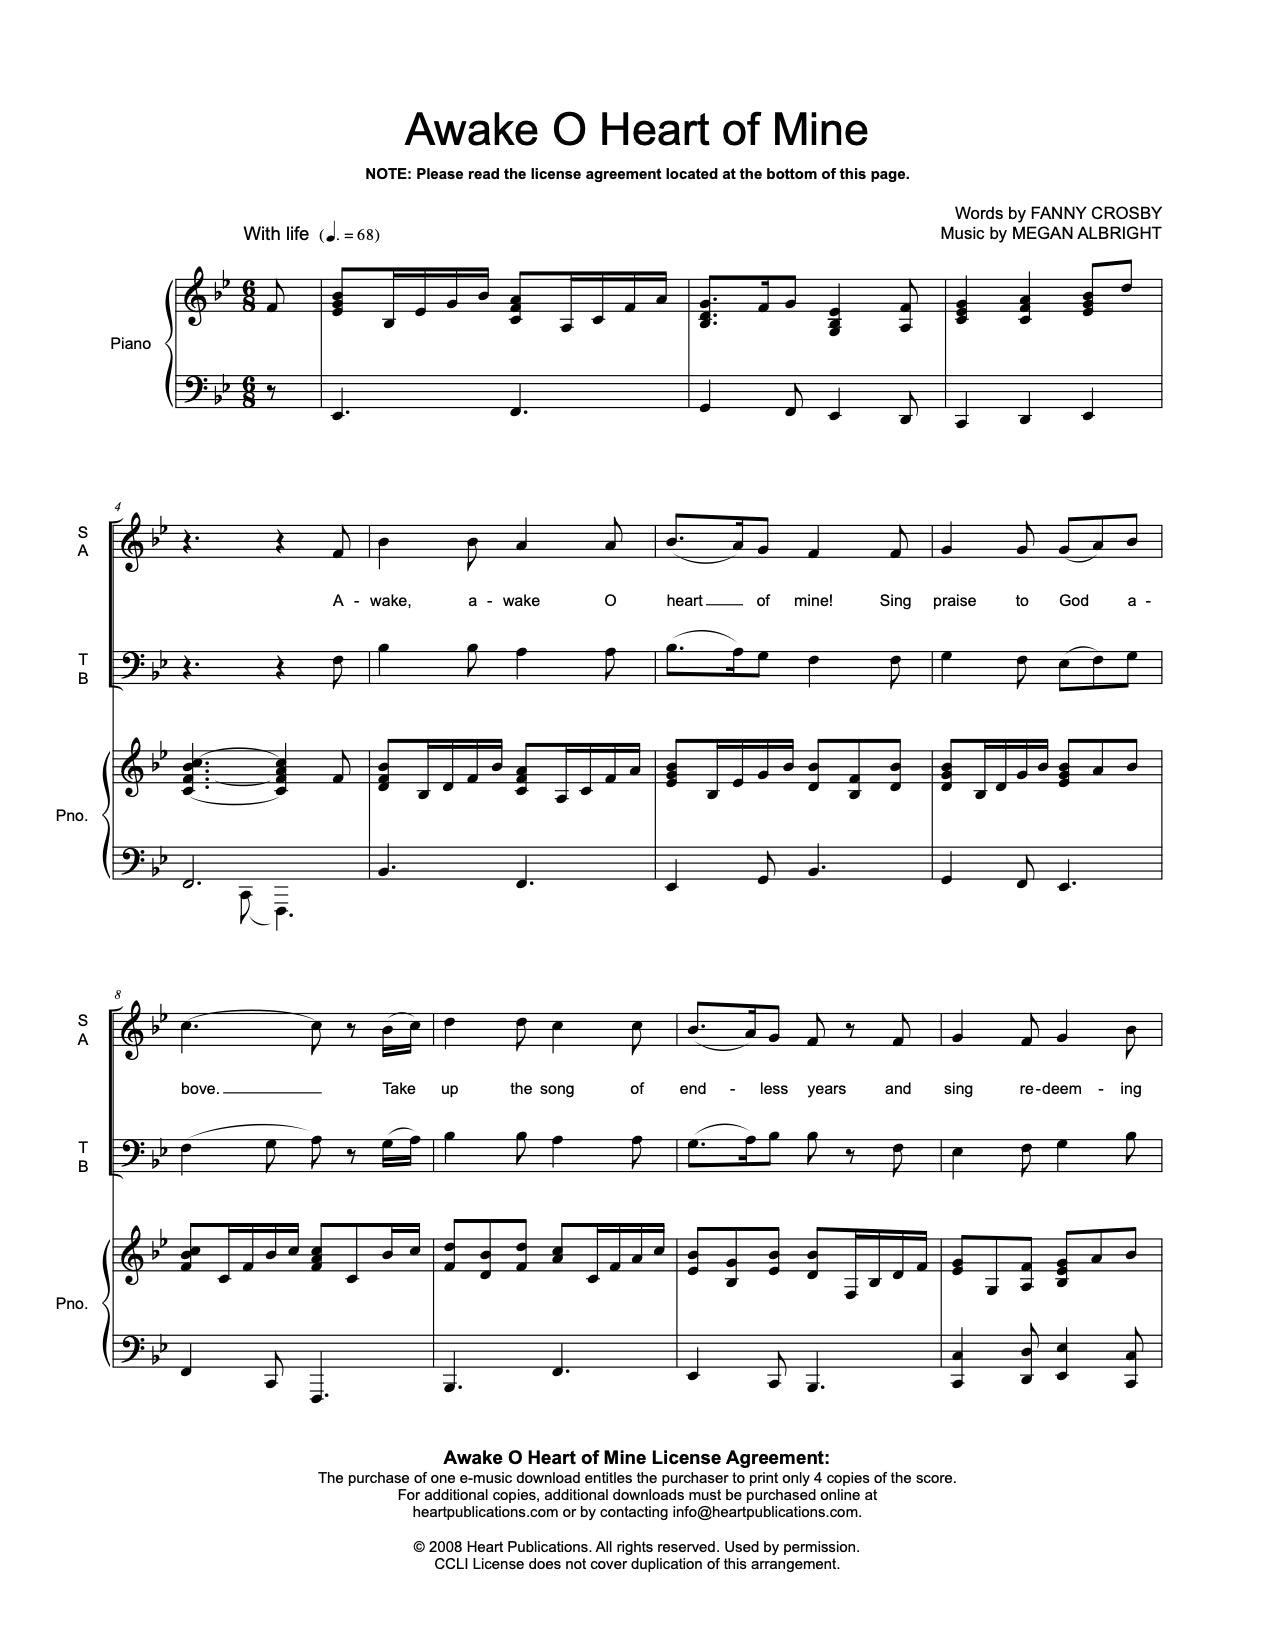 When Daisies Pied Sheet music for Piano, Voice (other) (Piano-Voice)